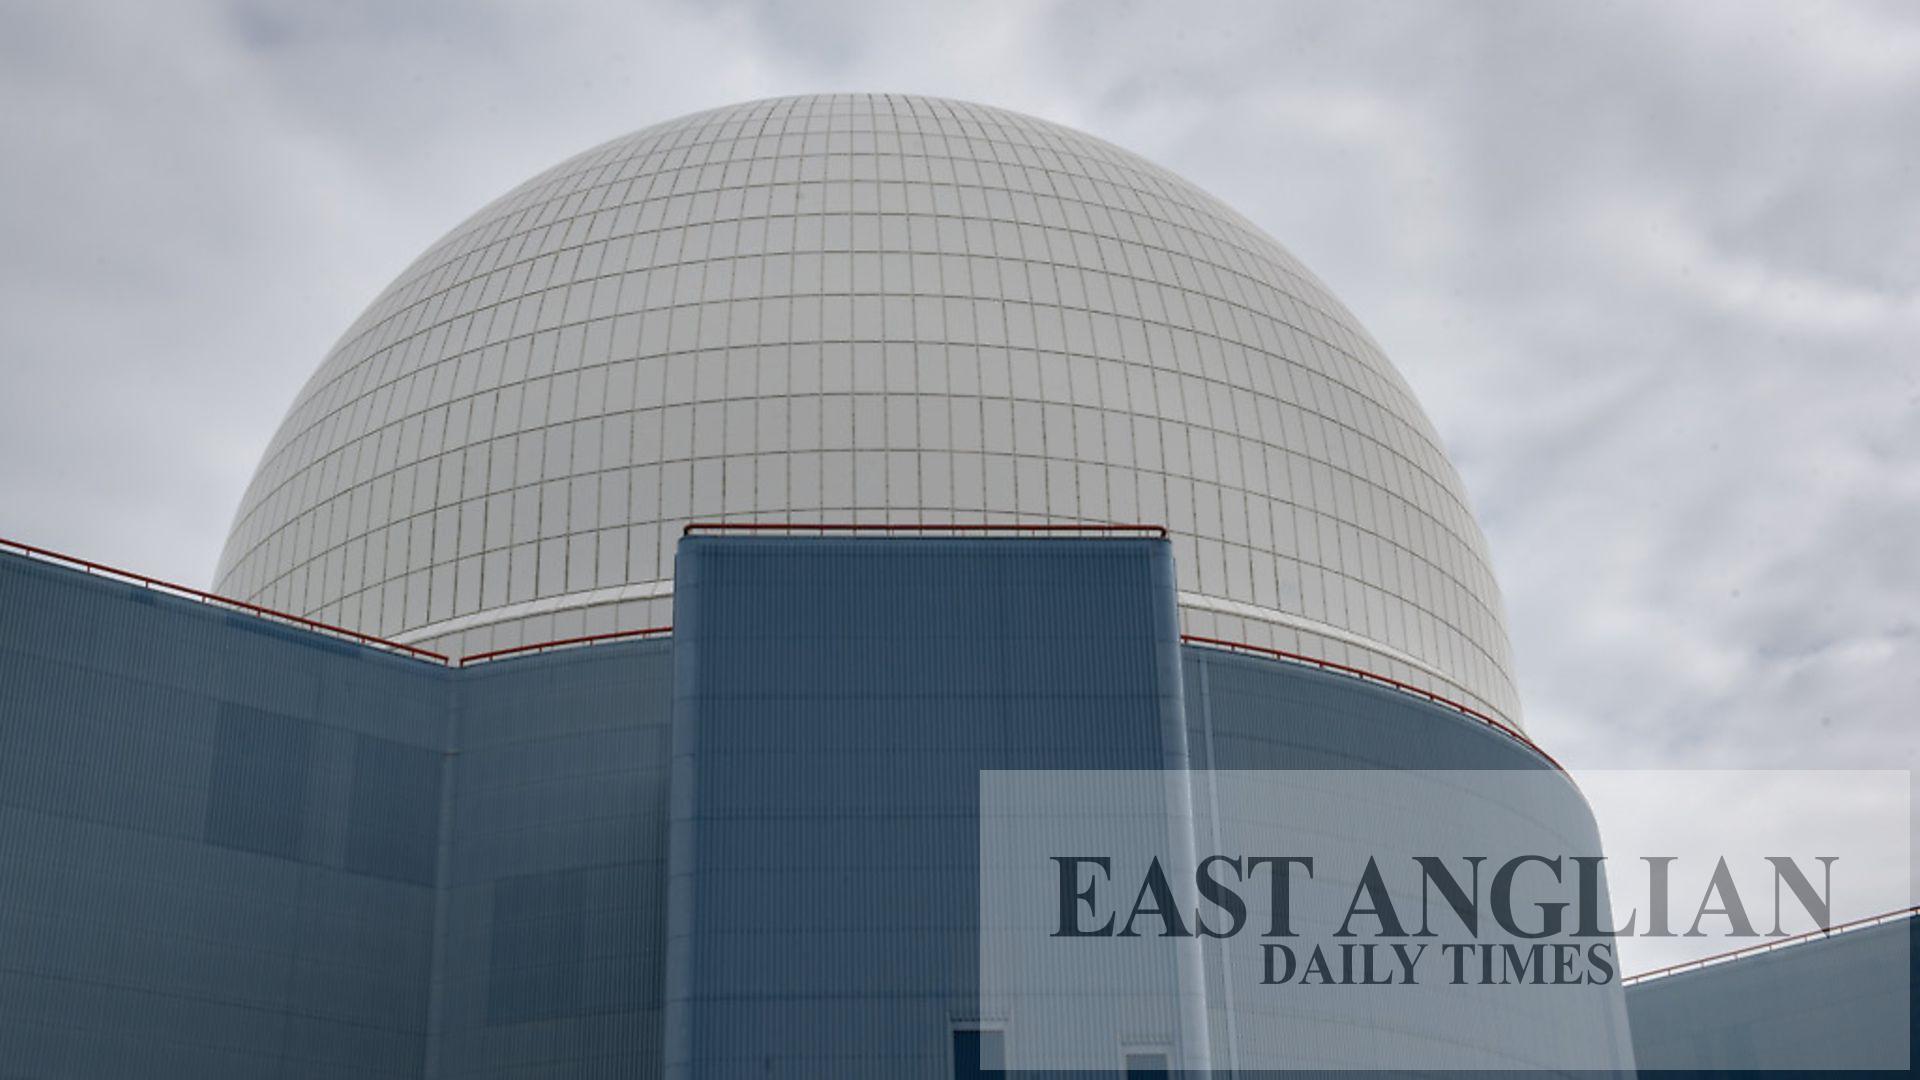 Sizewell B nuclear power station to switch off for 4 weeks - East Anglian Daily Times